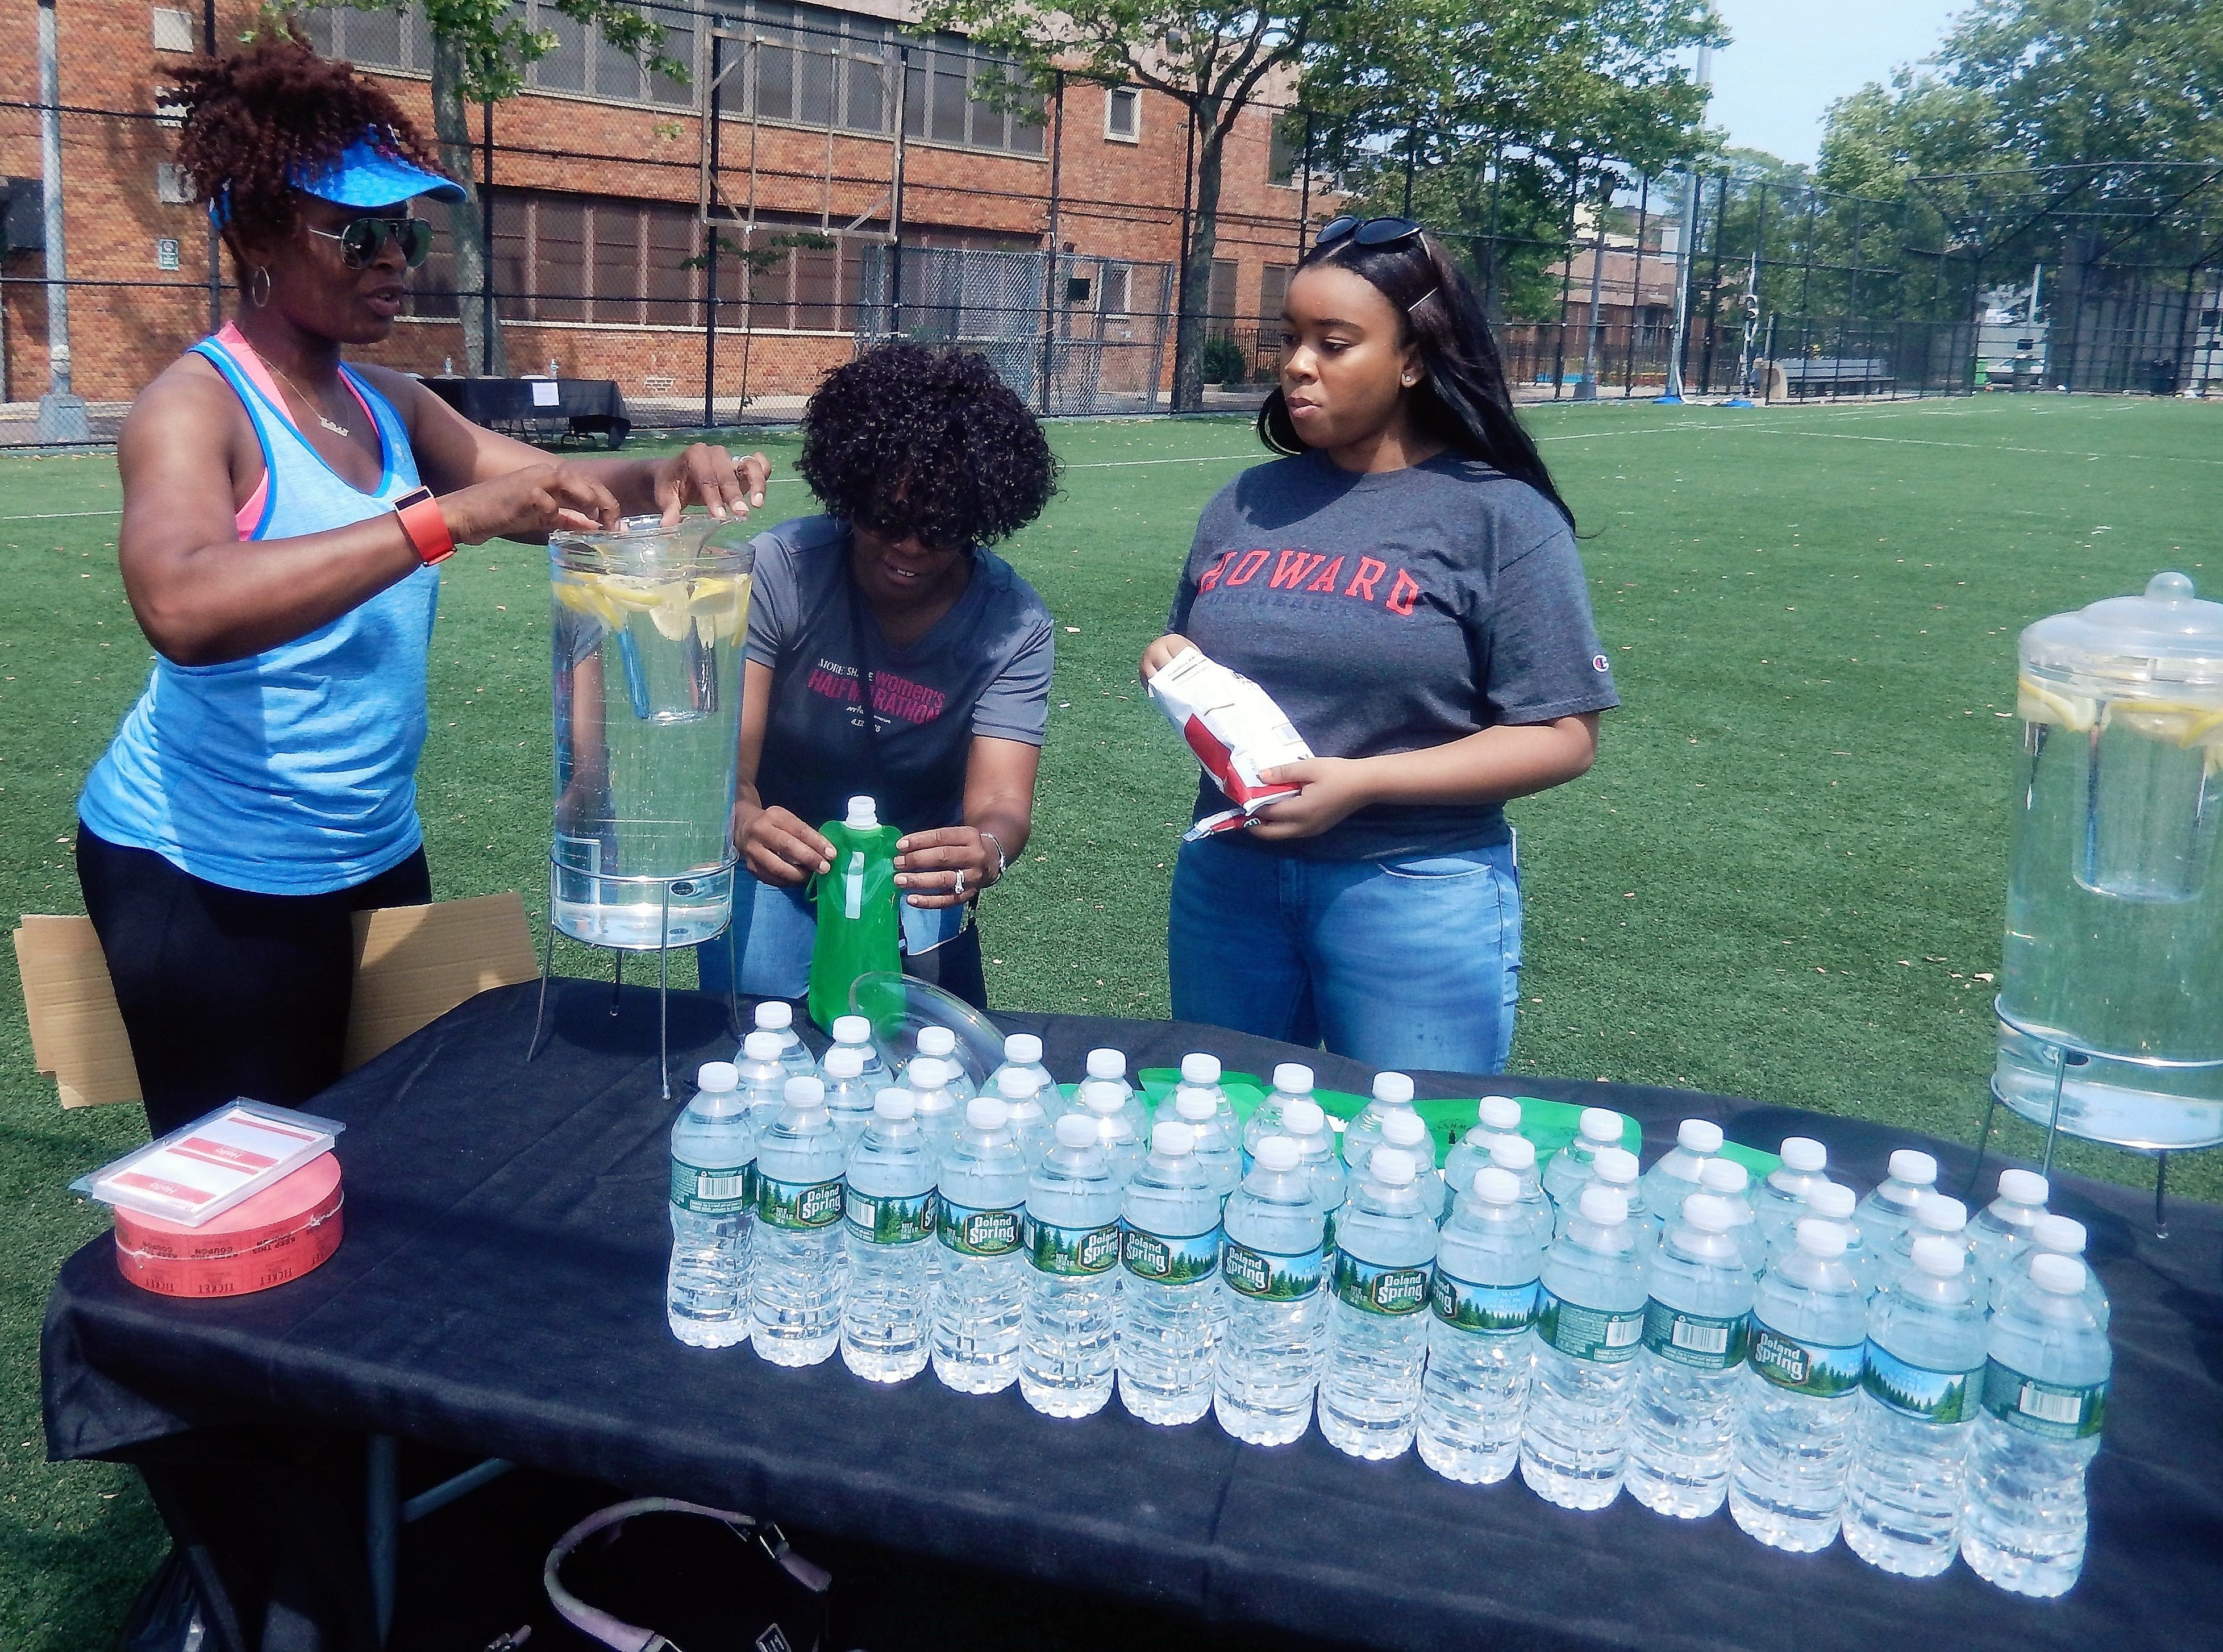 Water bottle table for yogis to stay hydrated - Breathe Brownsville Brooklyn Yoga Festival